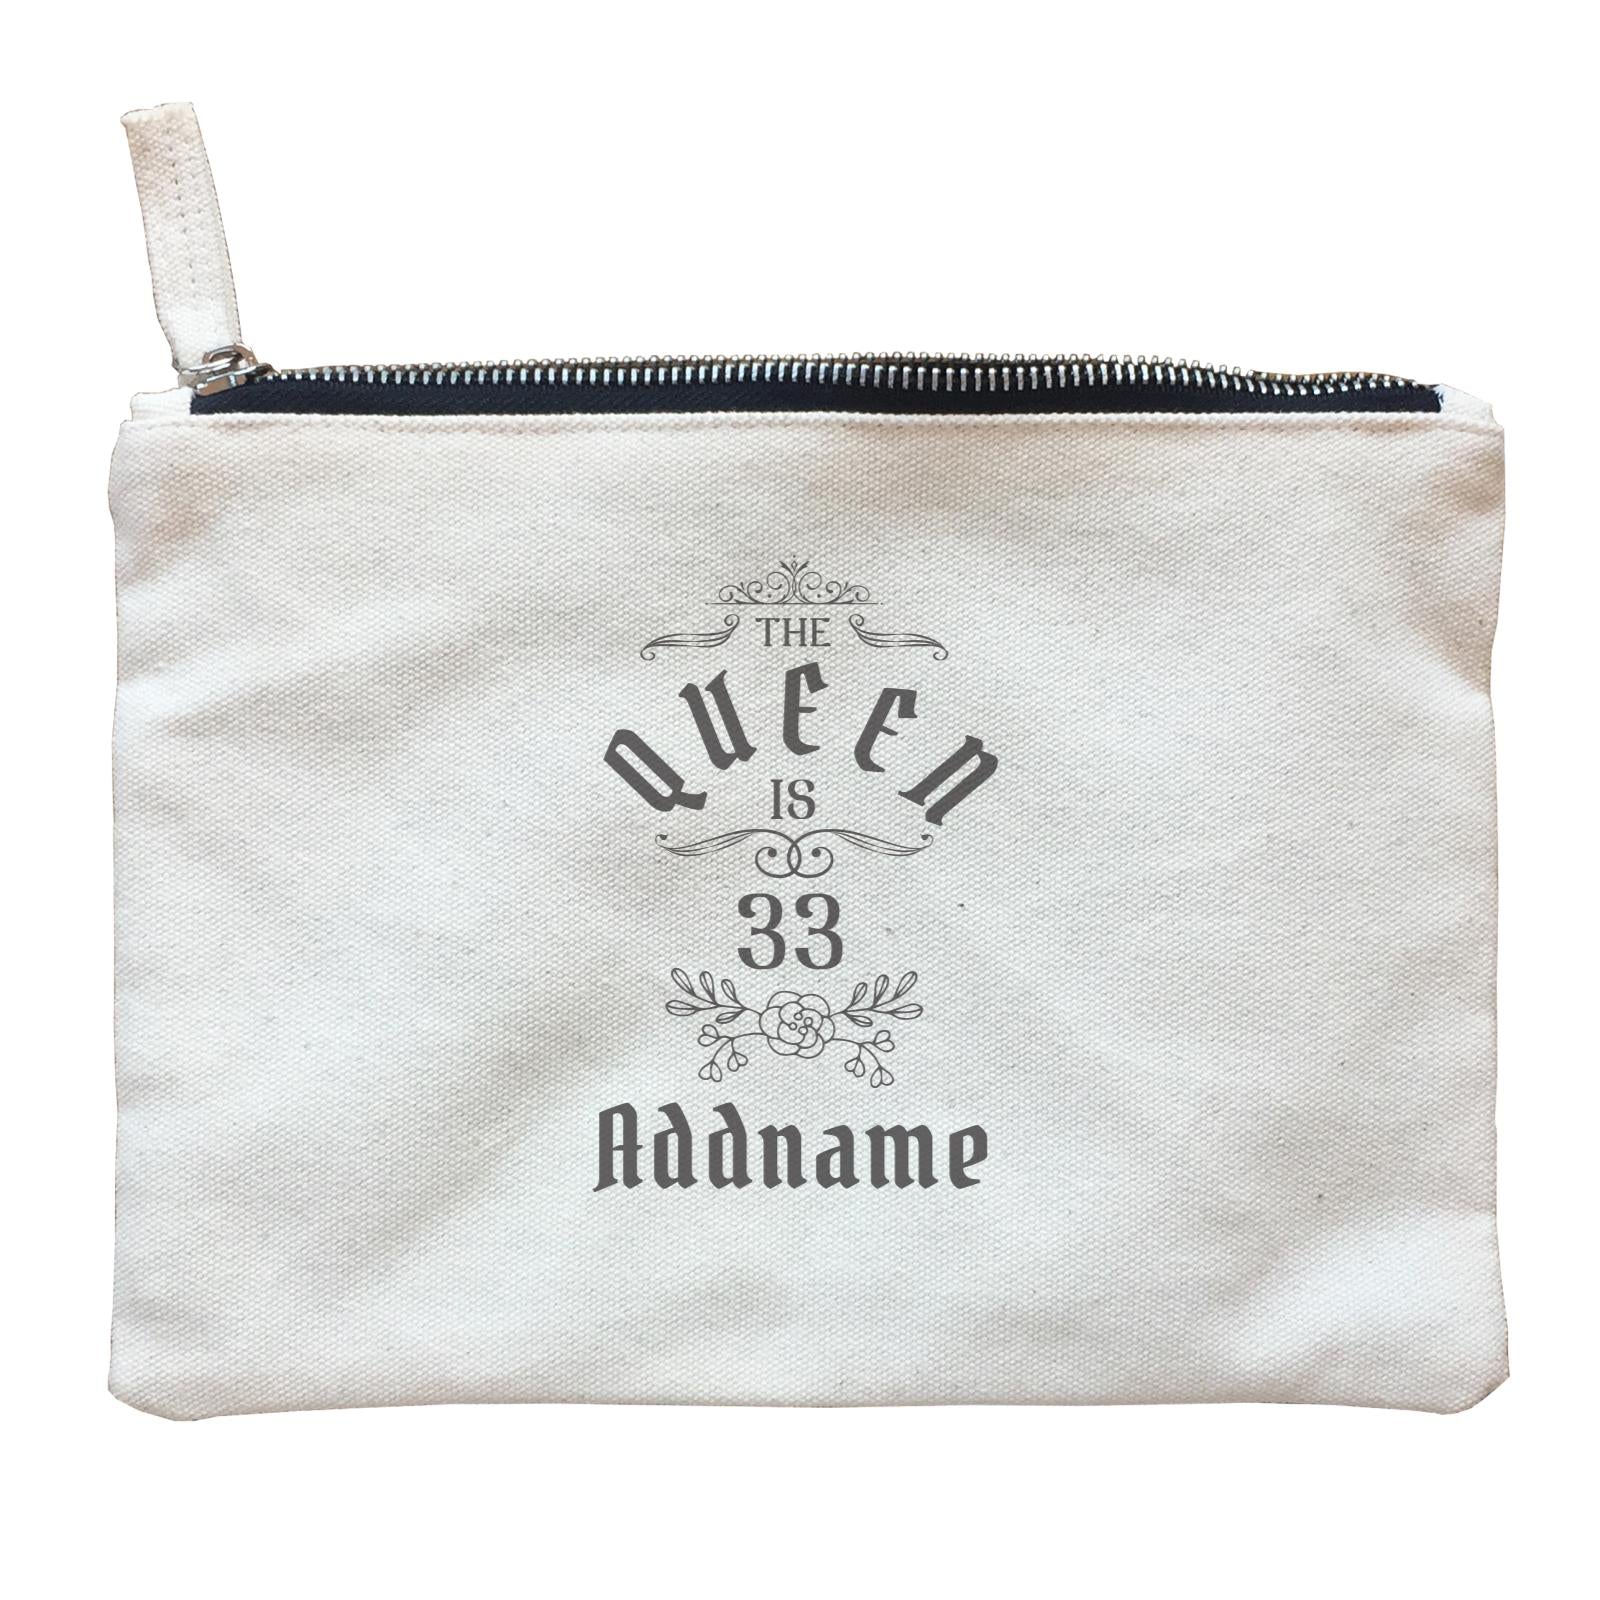 Personalize It Birthyear The Queen with Addname and Add Year Zipper Pouch